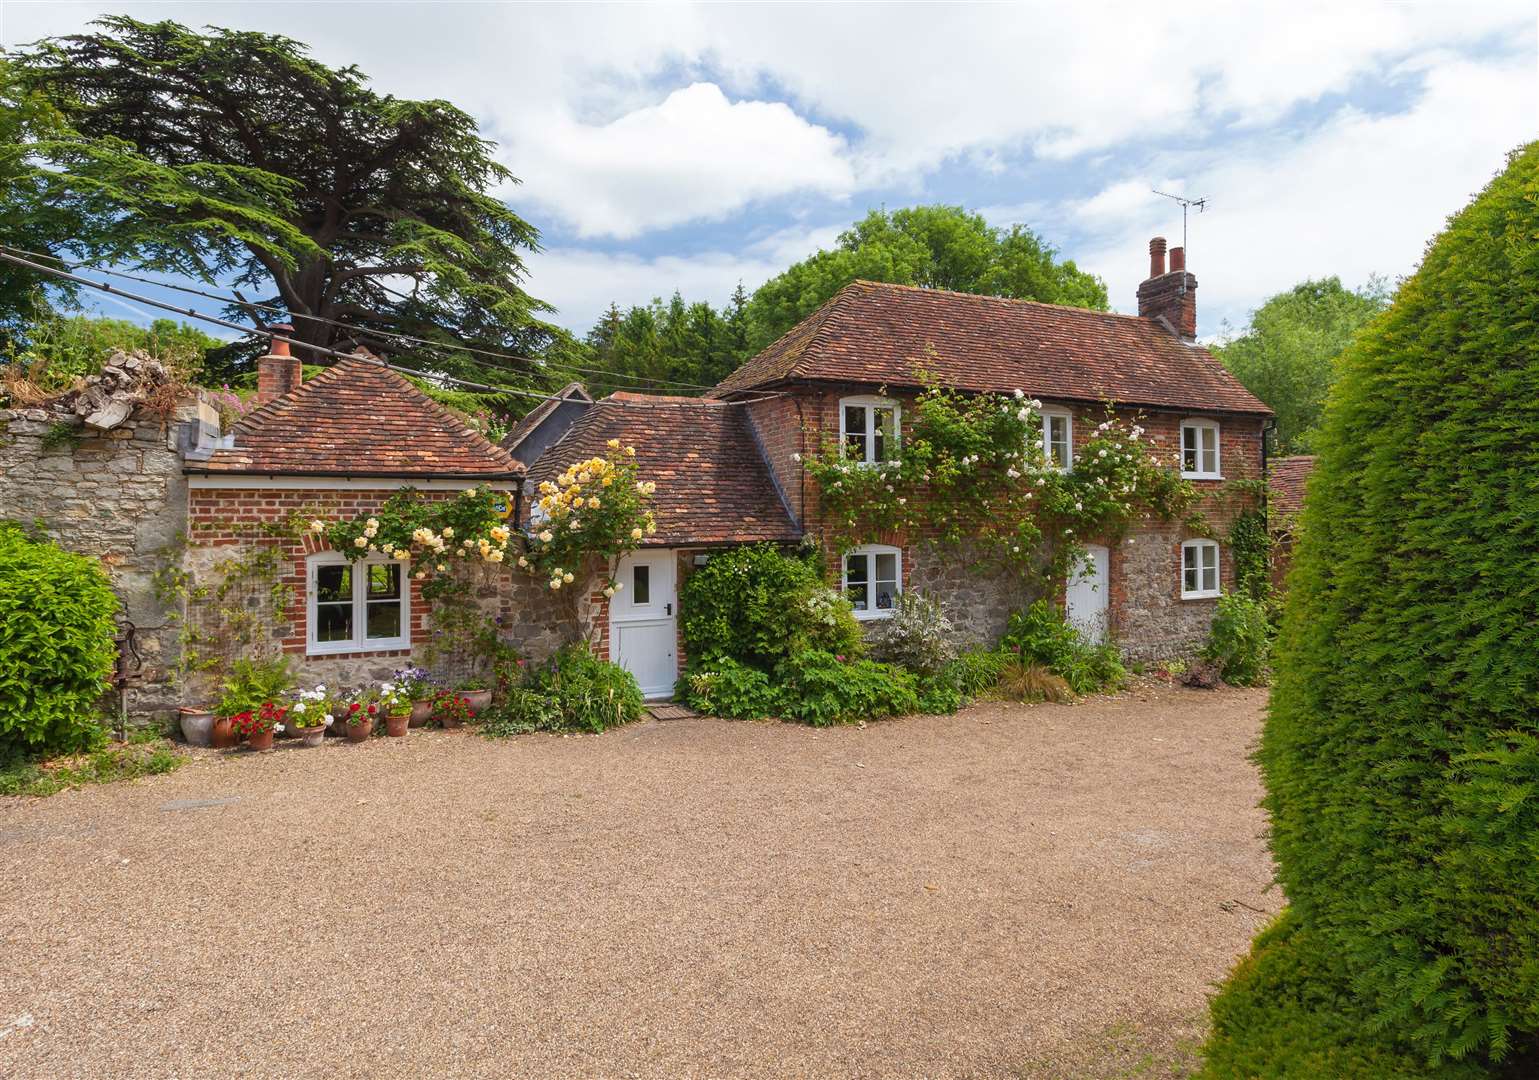 The cottage that comes with Boxley Abbey House